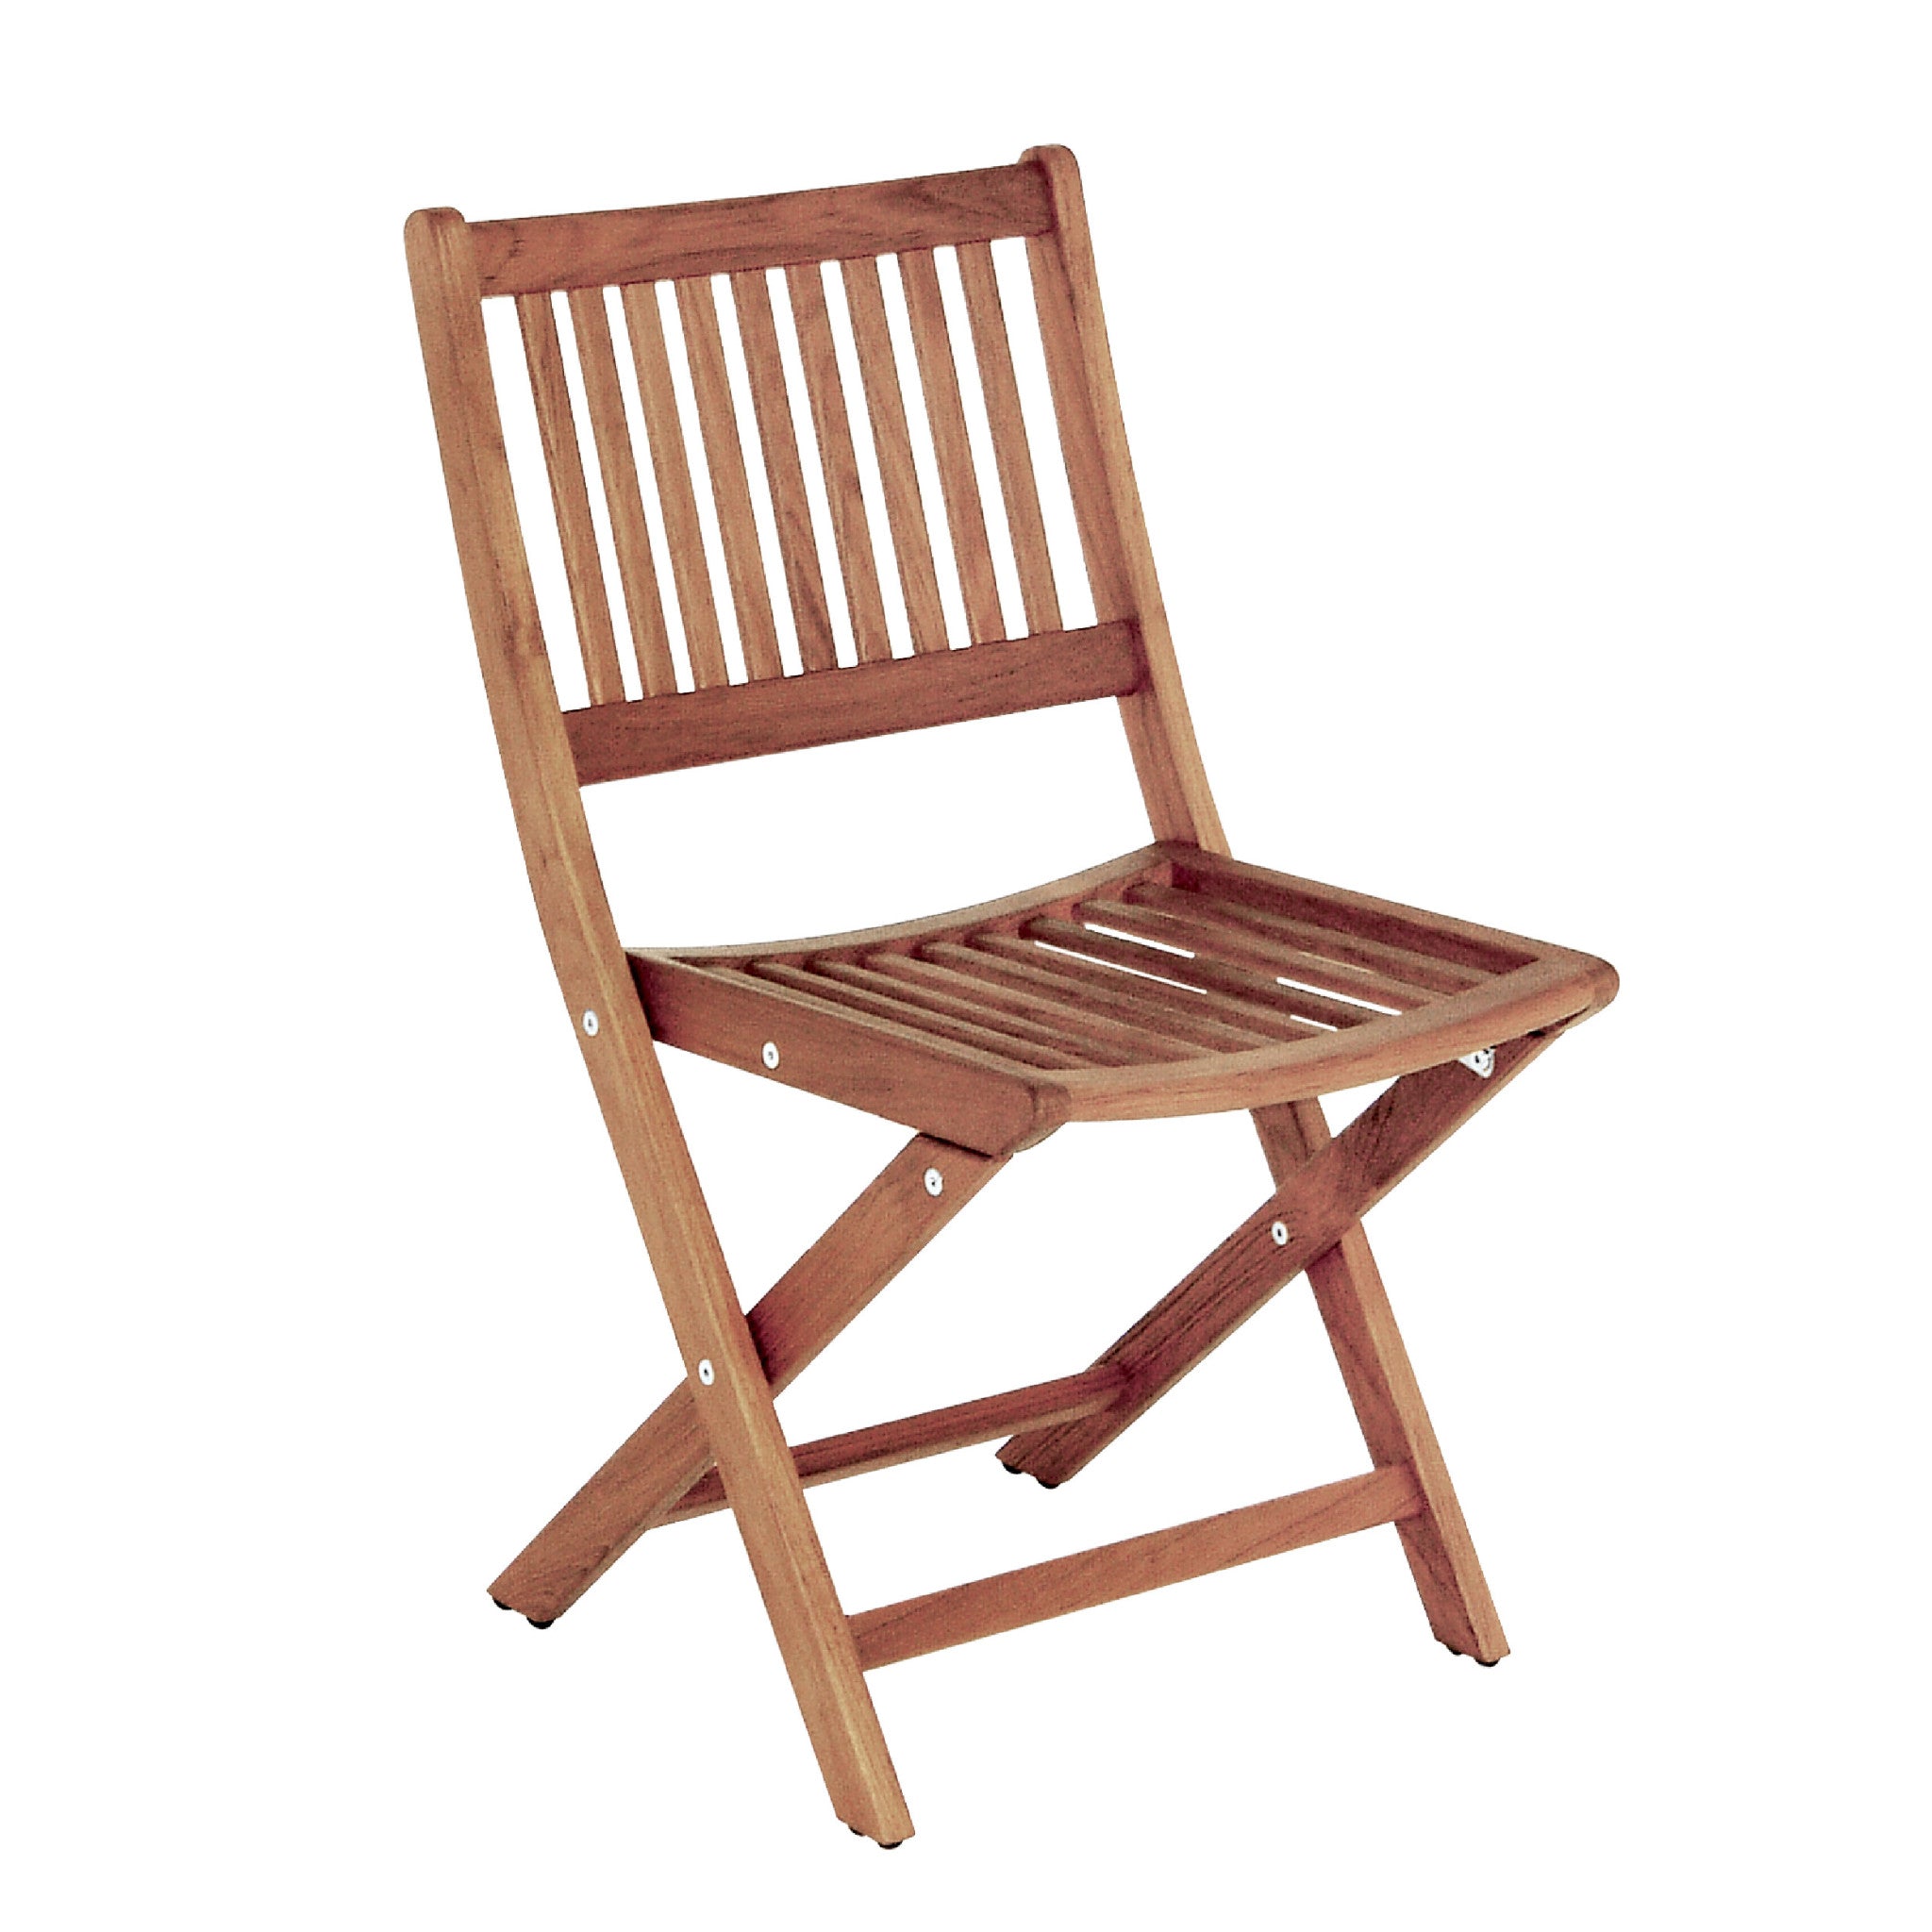 Brown-Solid-Wood-Deck-Chair-Outdoor-Chairs